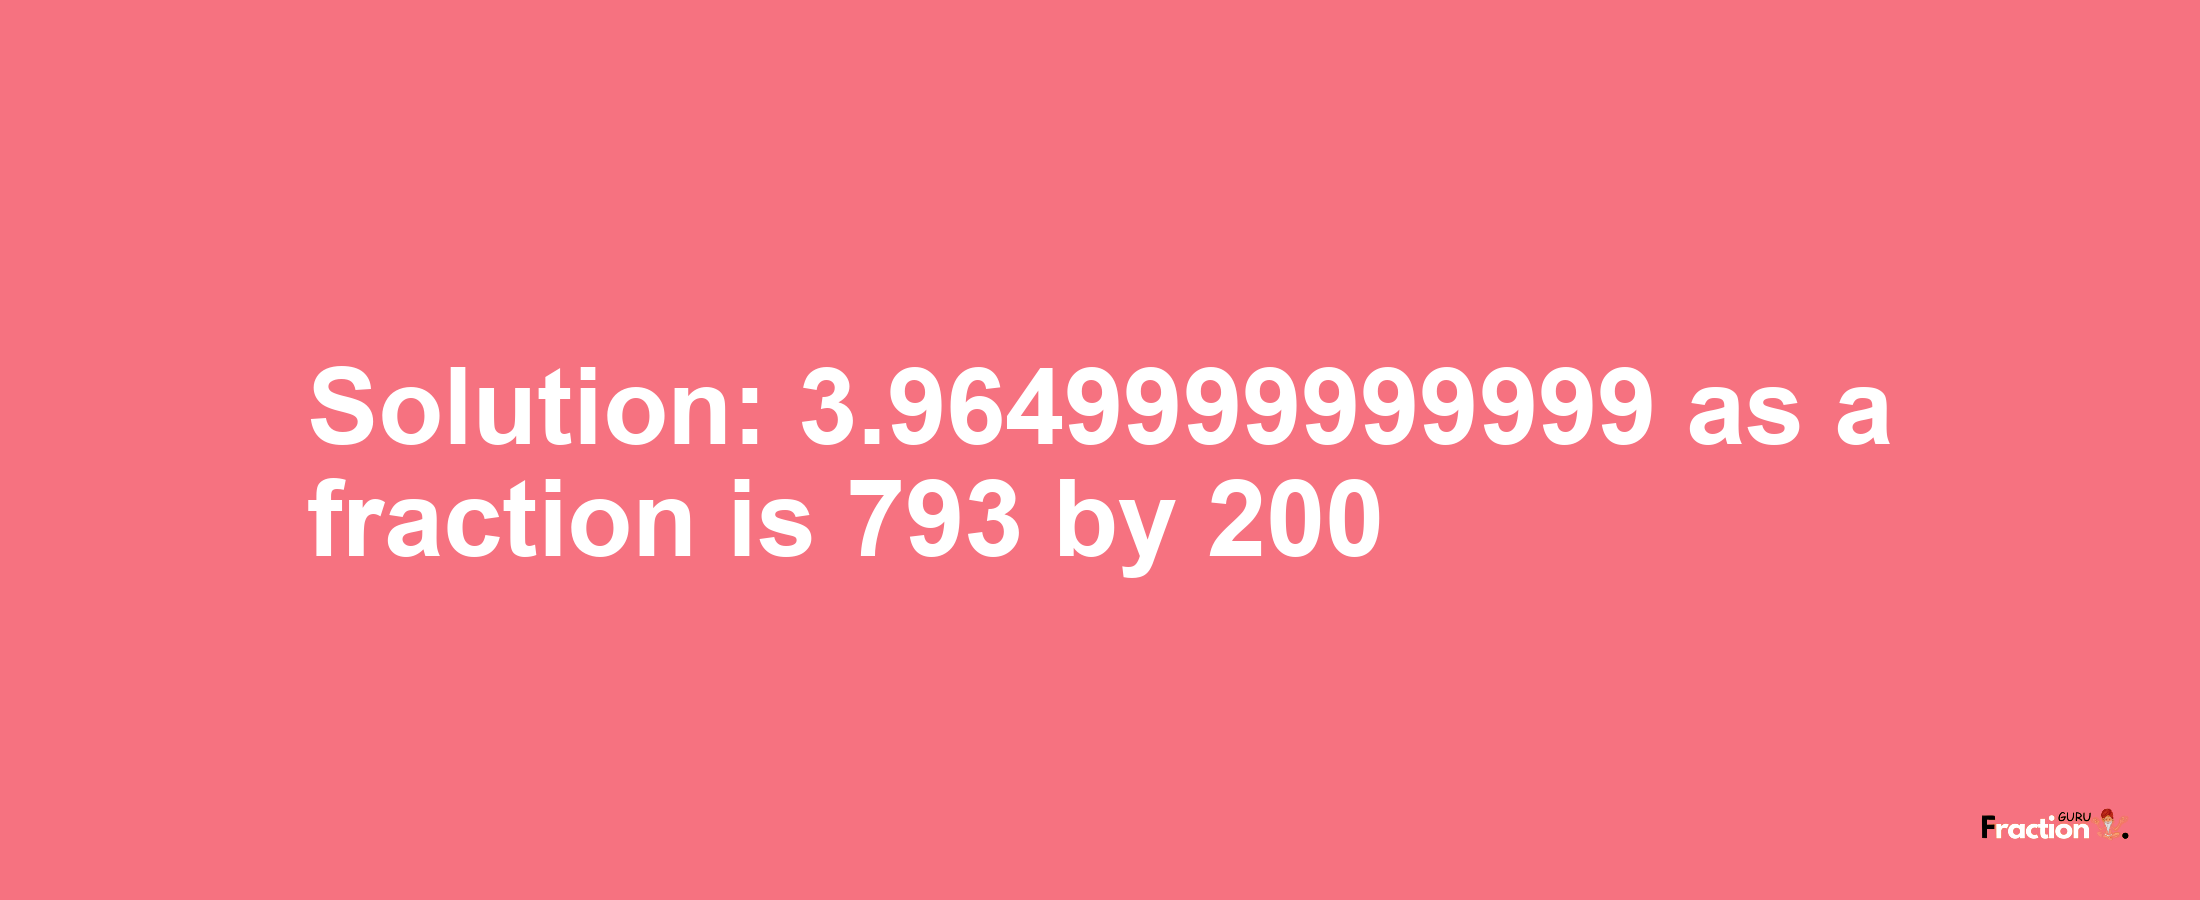 Solution:3.9649999999999 as a fraction is 793/200